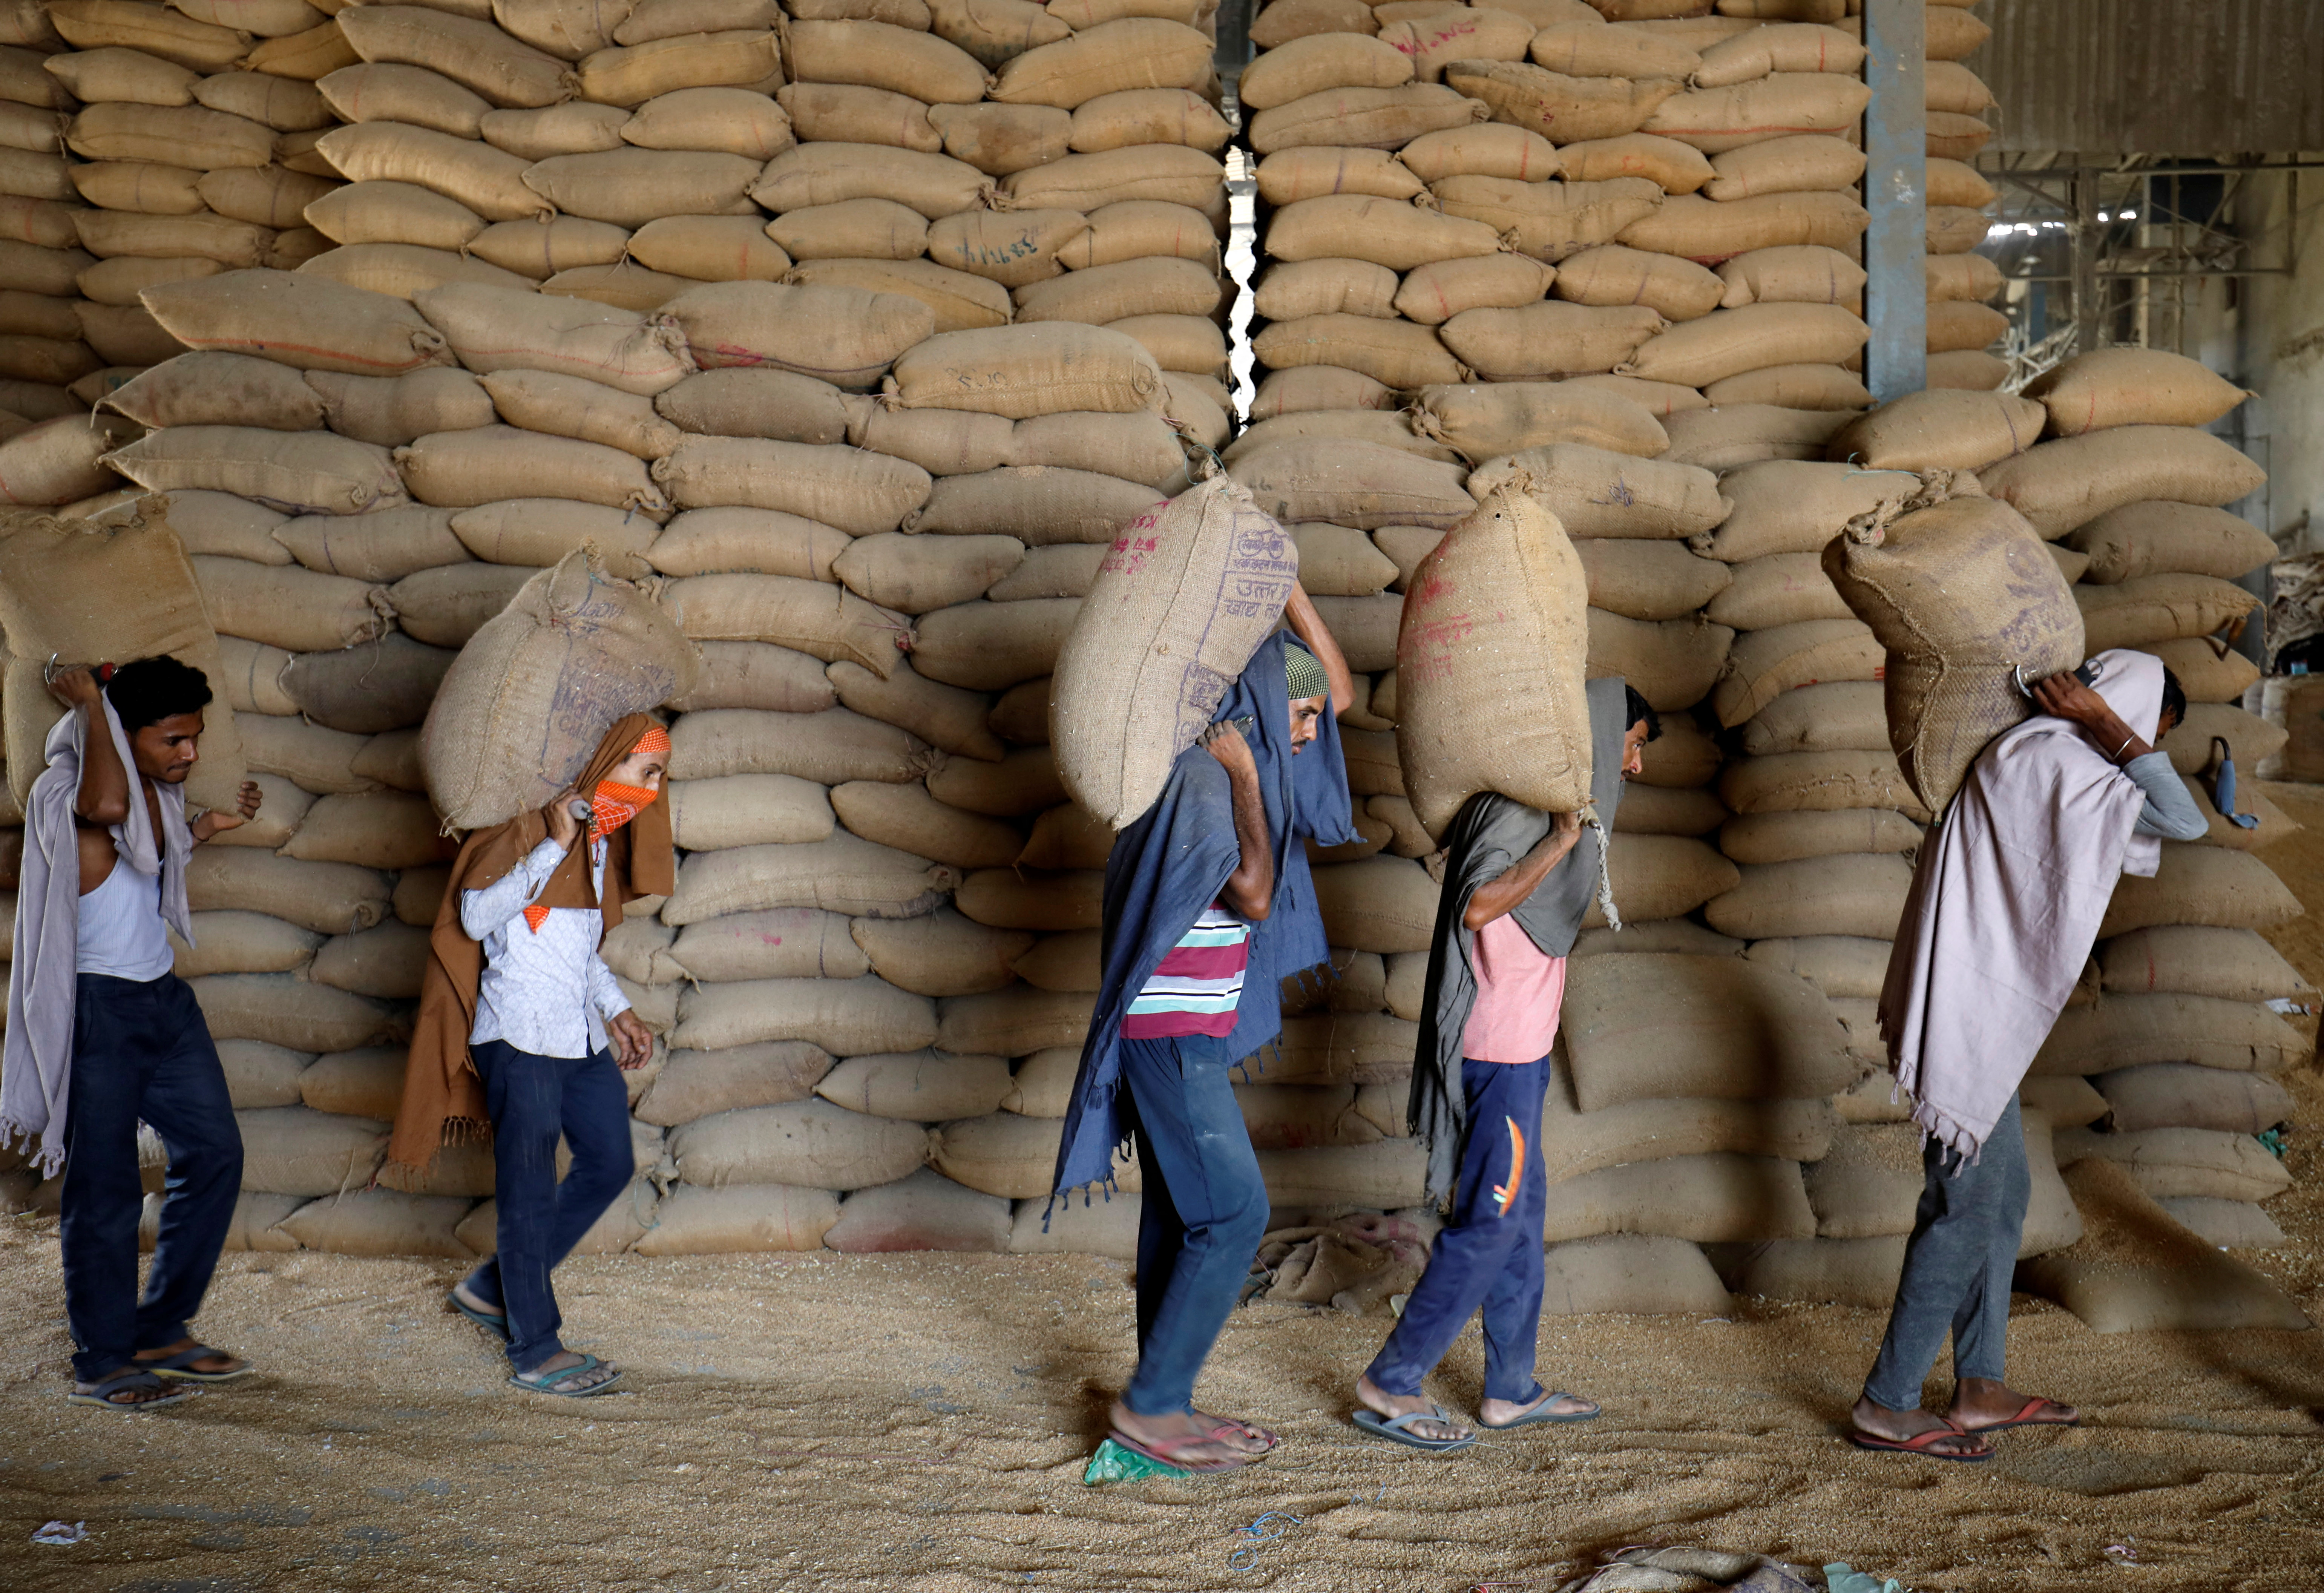 Workers carry sacks of wheat for sifting at a grain mill on the outskirts of Ahmedabad